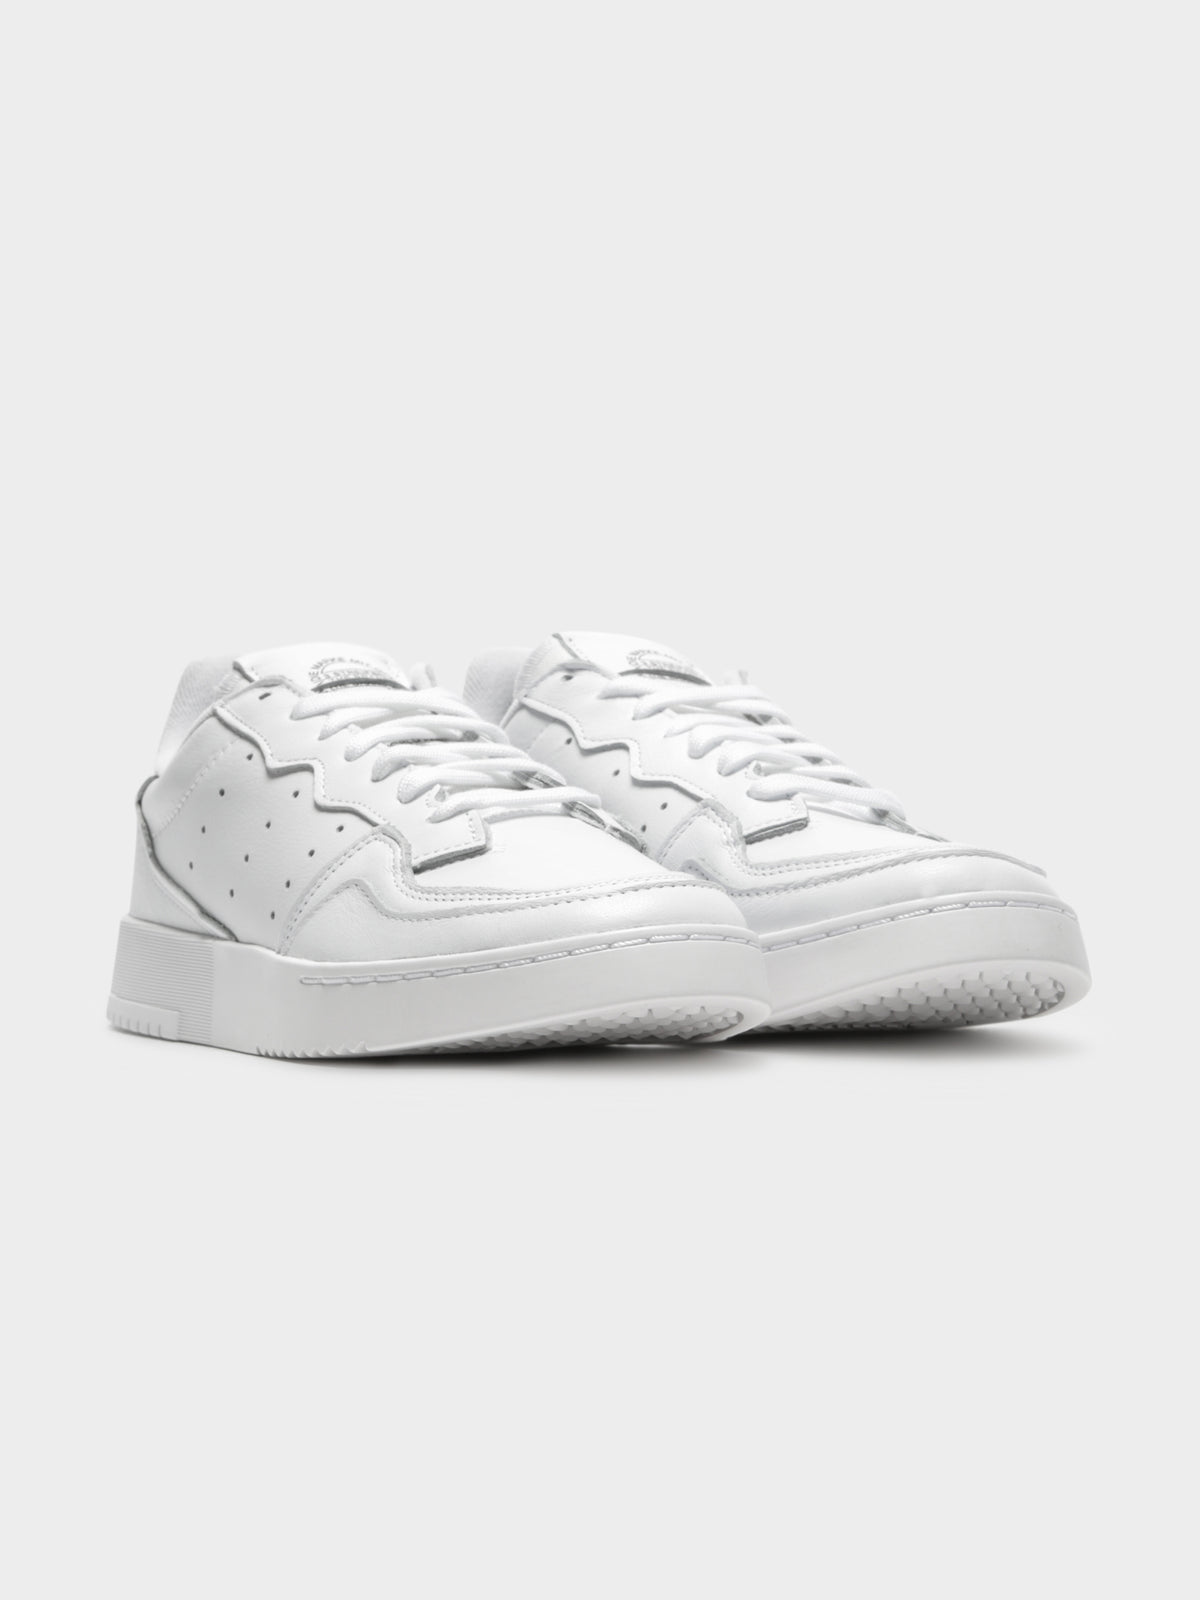 Supercourt Leather Sneakers in White